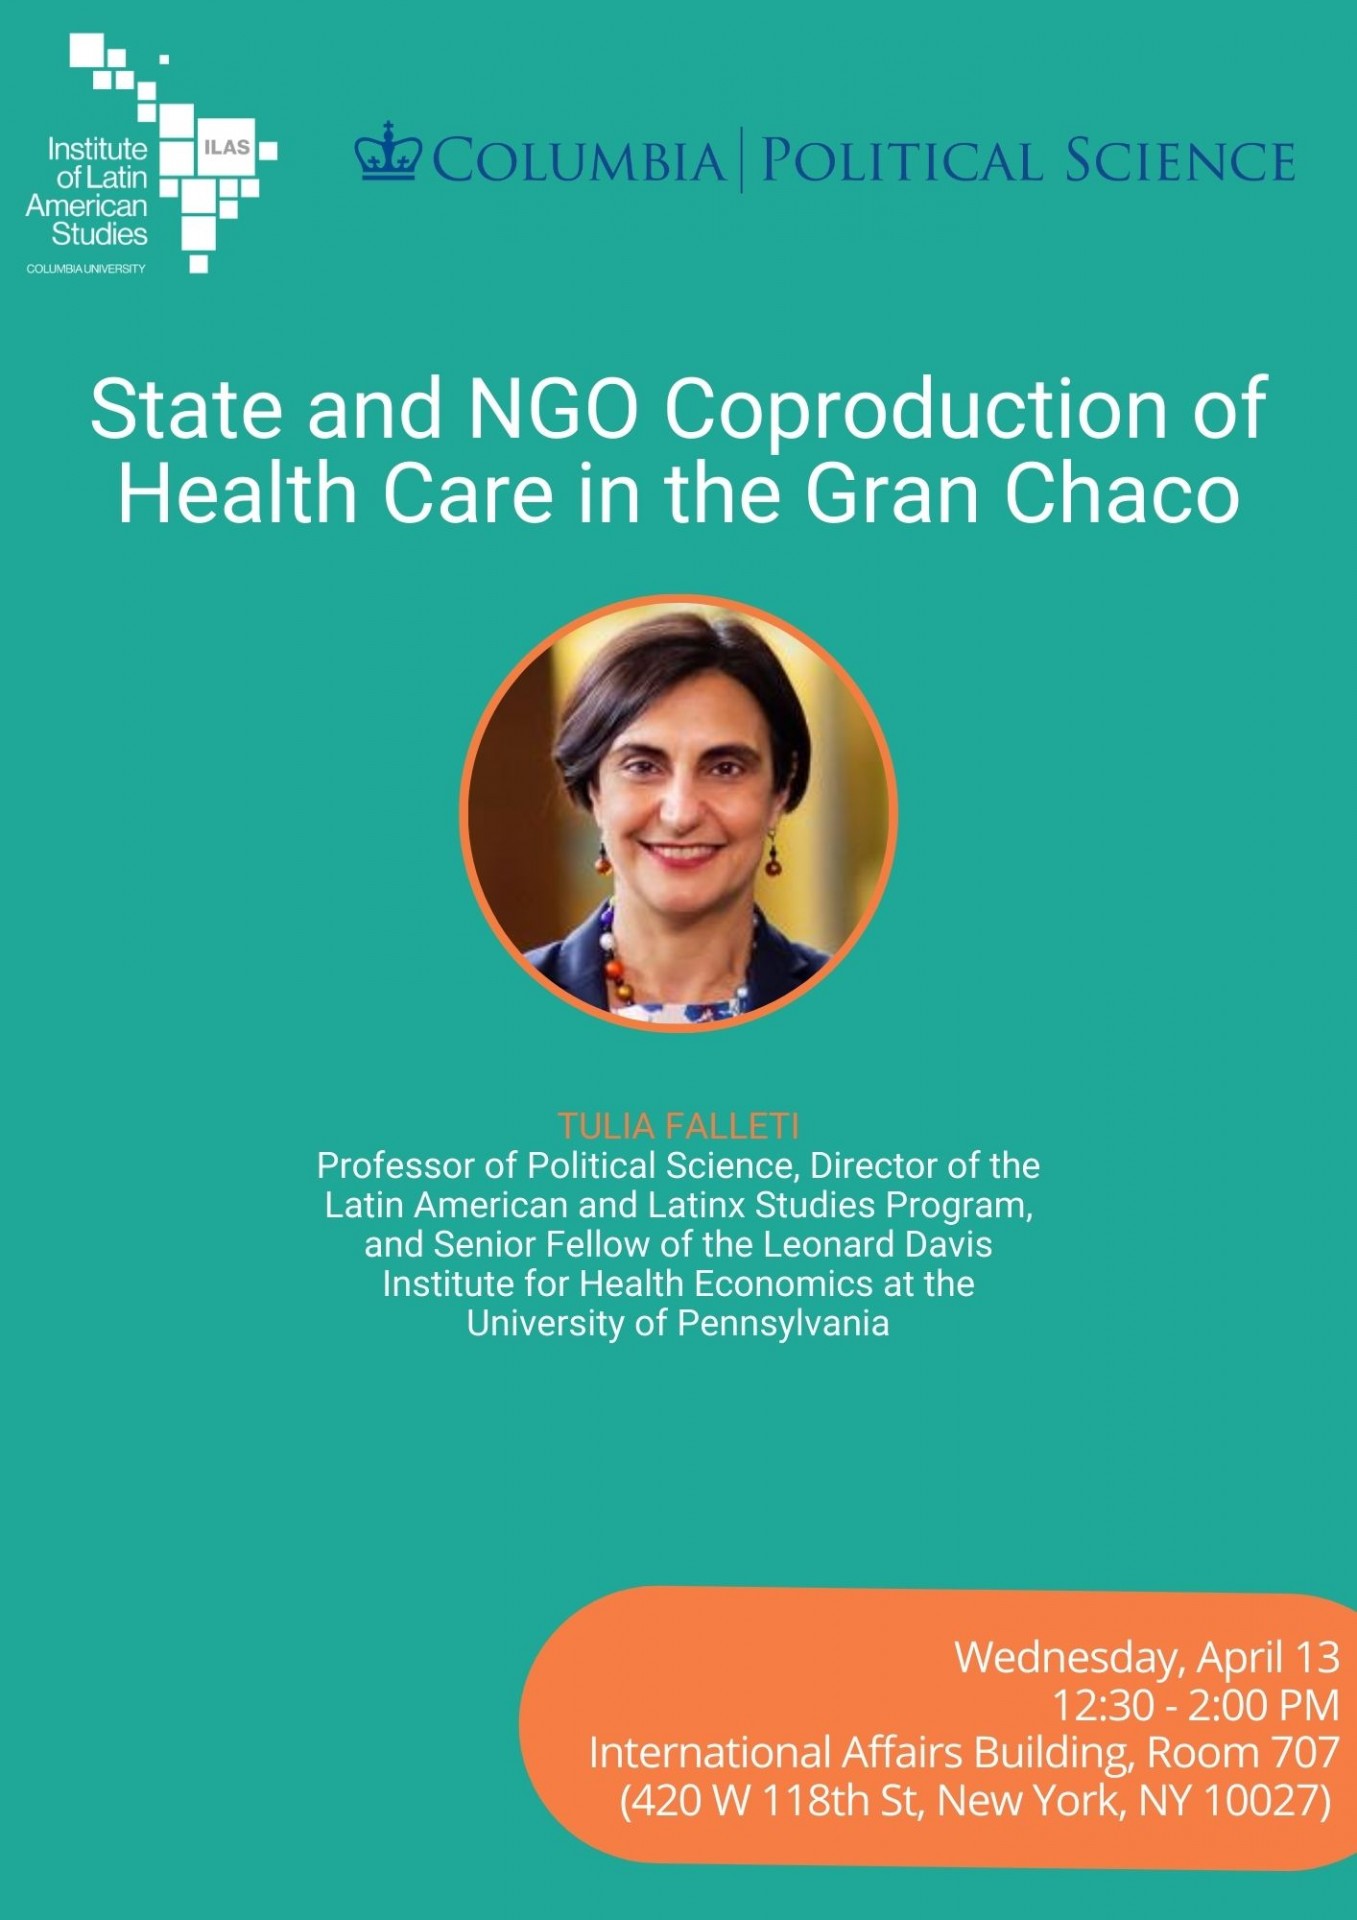 State and NGO Coproduction of Health Care in the Gran Chaco